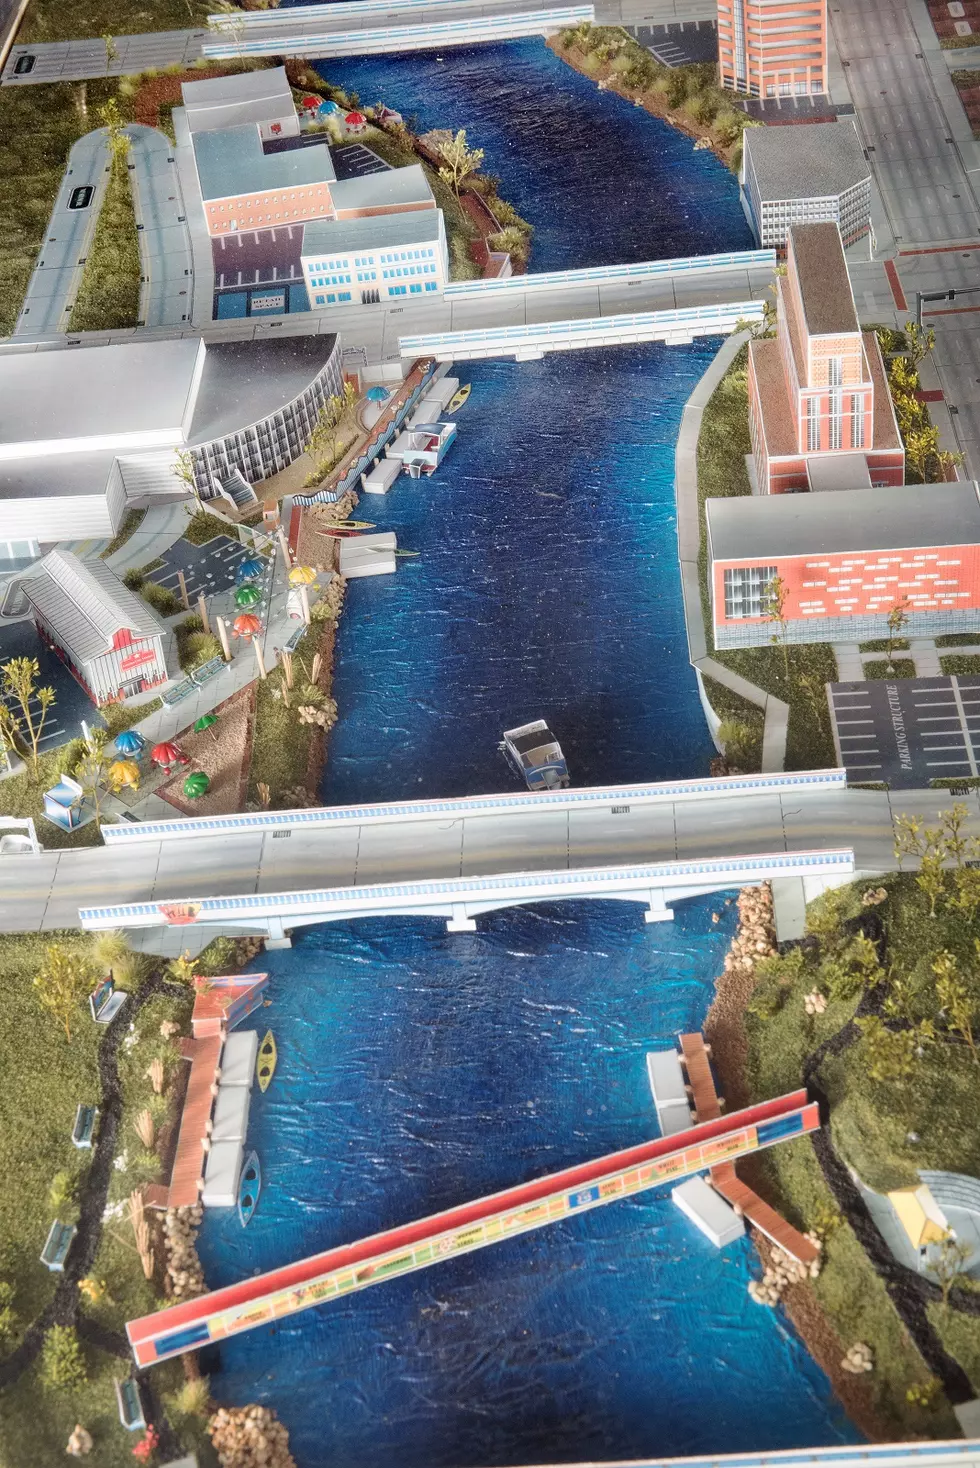 Lansing Riverfront Redo Funded $1M by Our Community Foundation